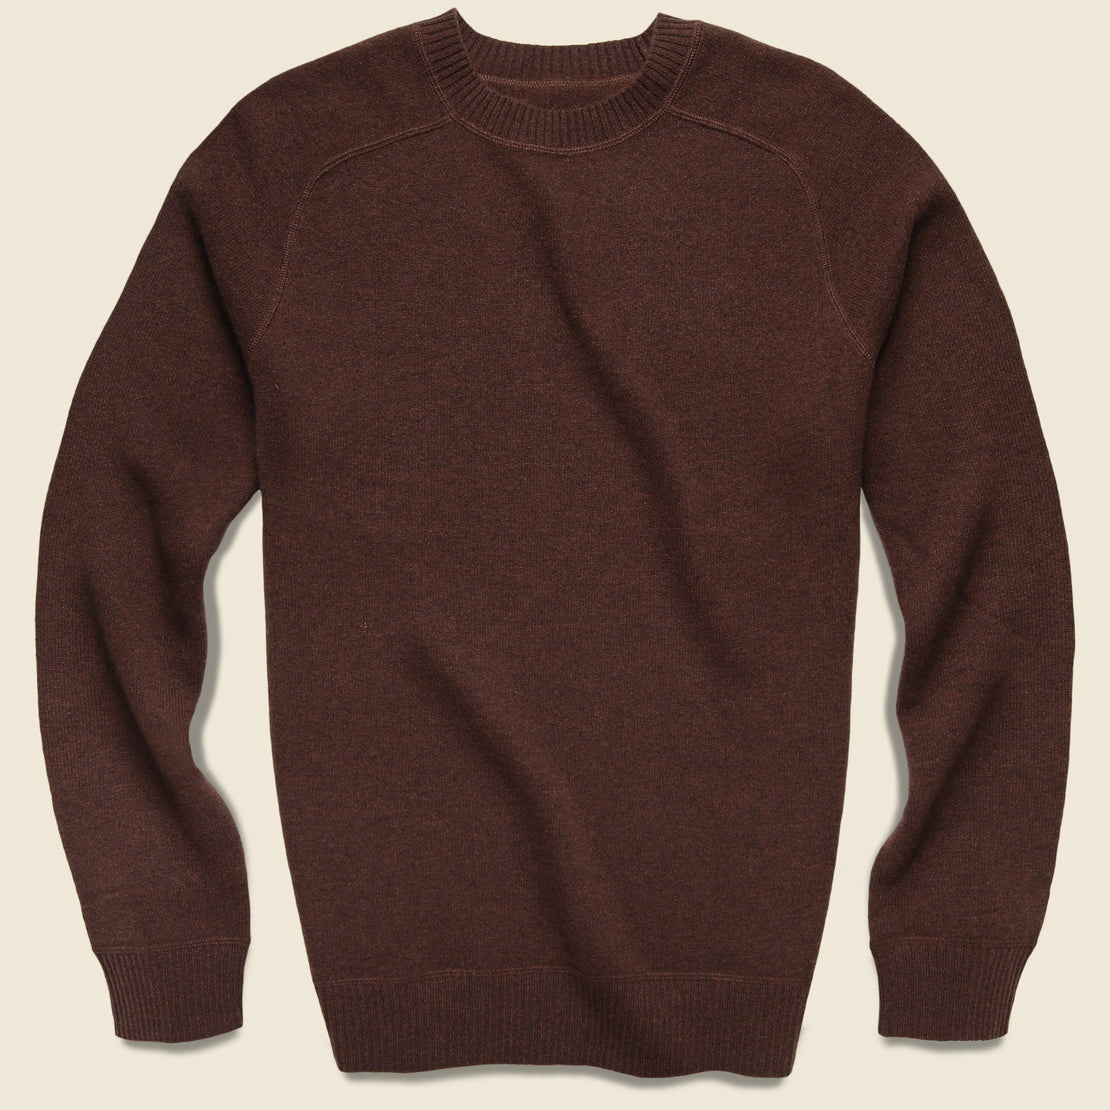 Life After Denim Columbia Cashmere Sweater - Brown